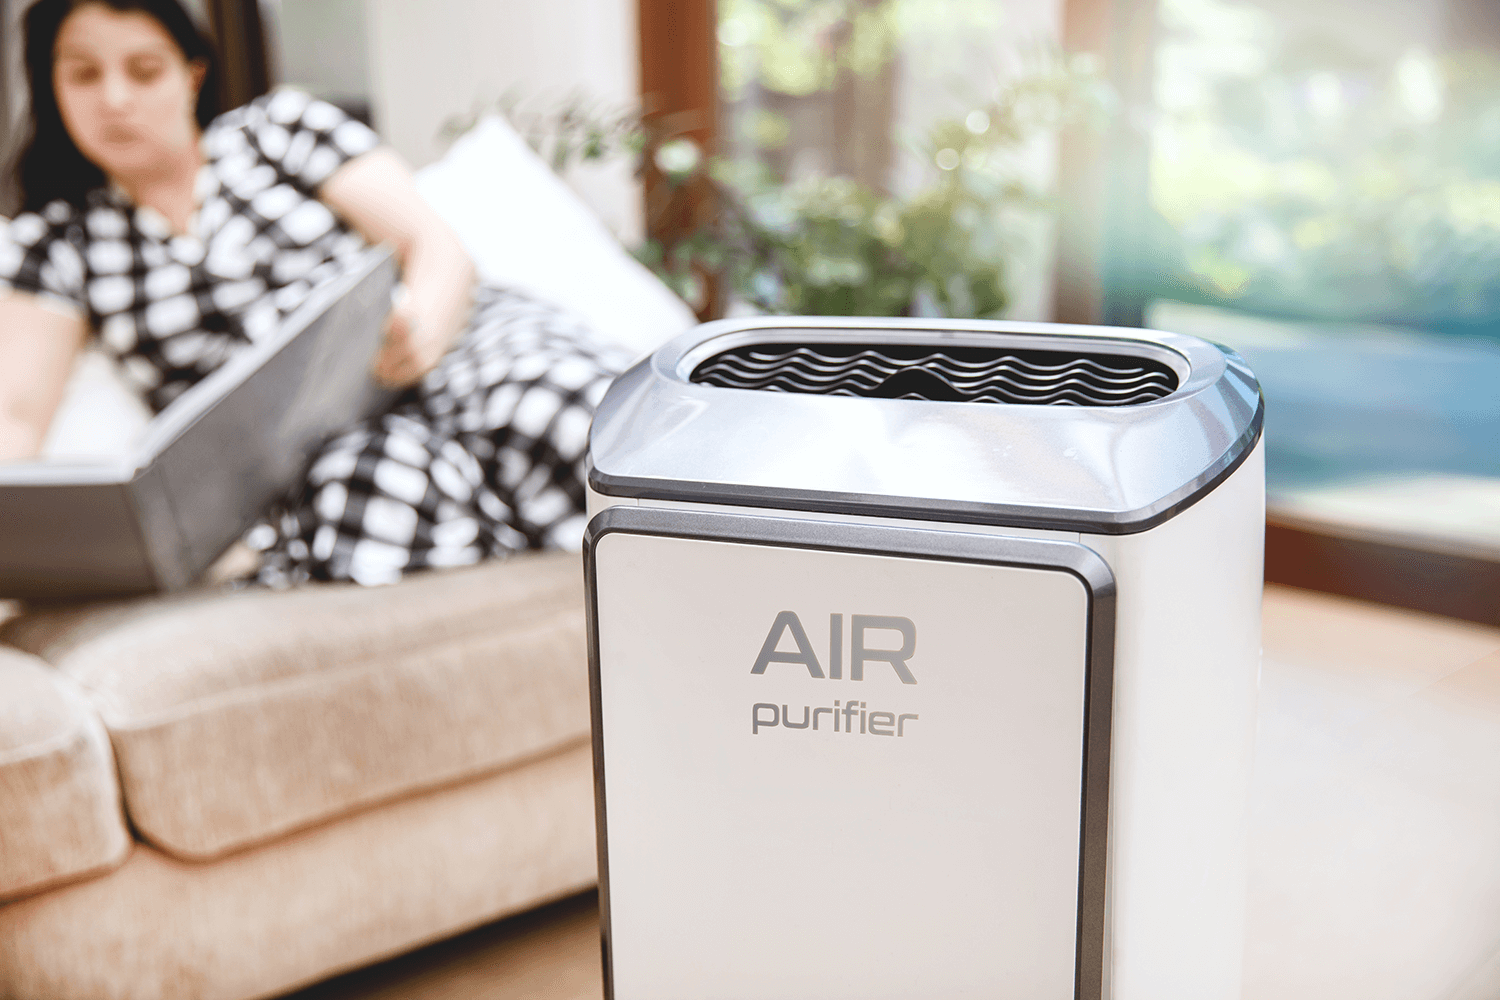 Air purifier cleans up air quality. Modern air purifier cleans up the air in the living room with woman reading a book on couch in the background.